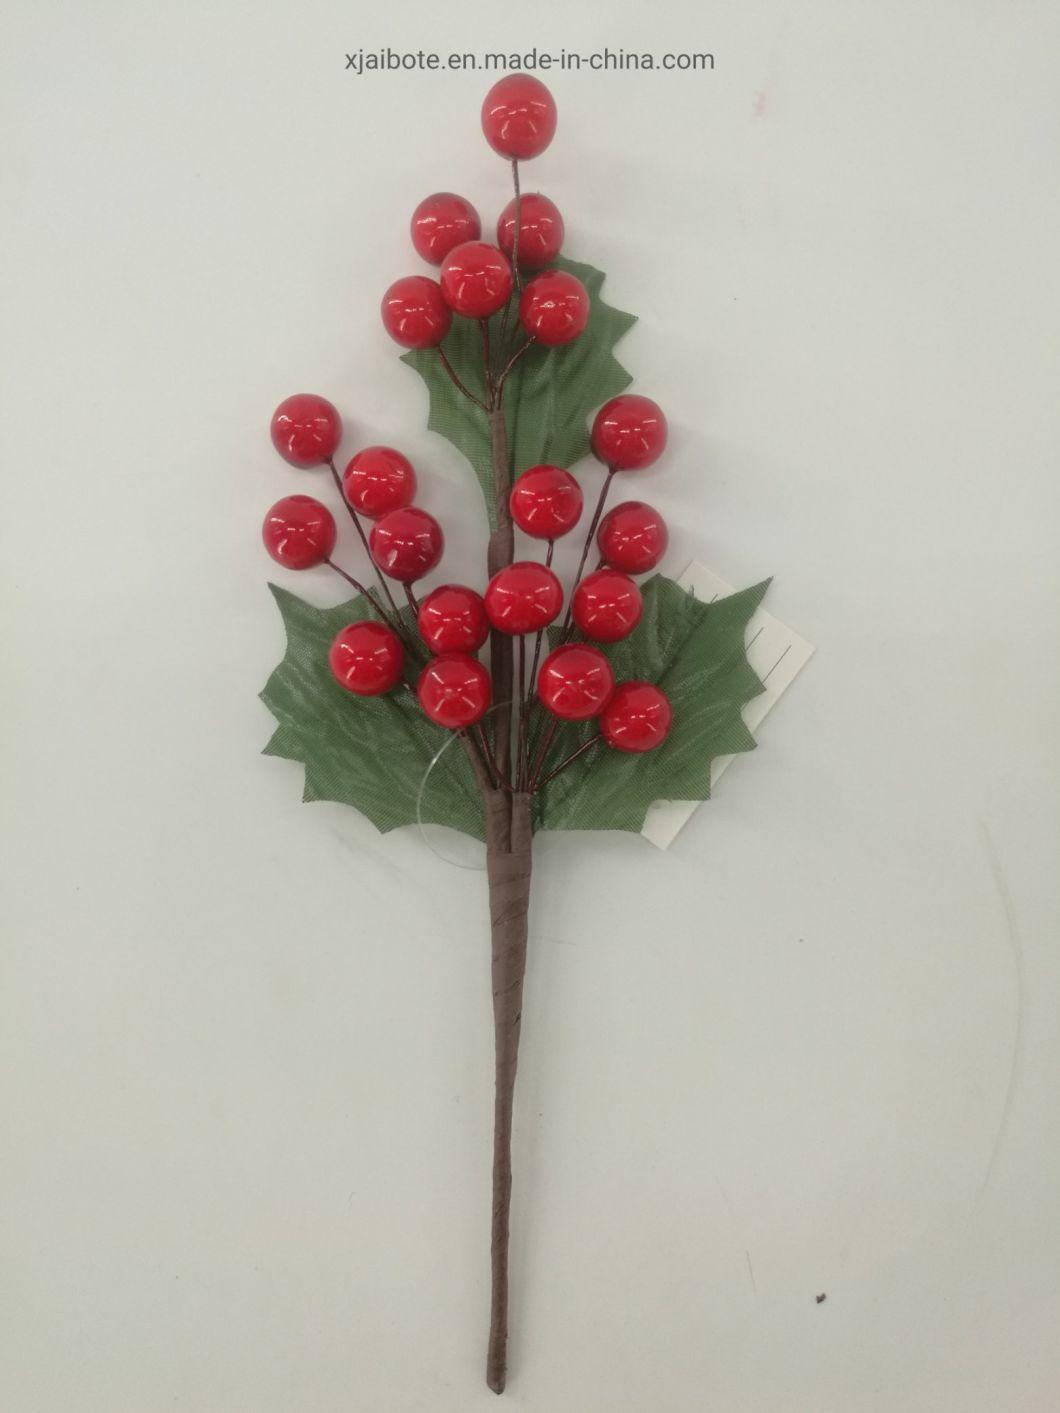 High Quality Artificial Christmas Glitter Red Berry Branch Picks for Xmas Decoration